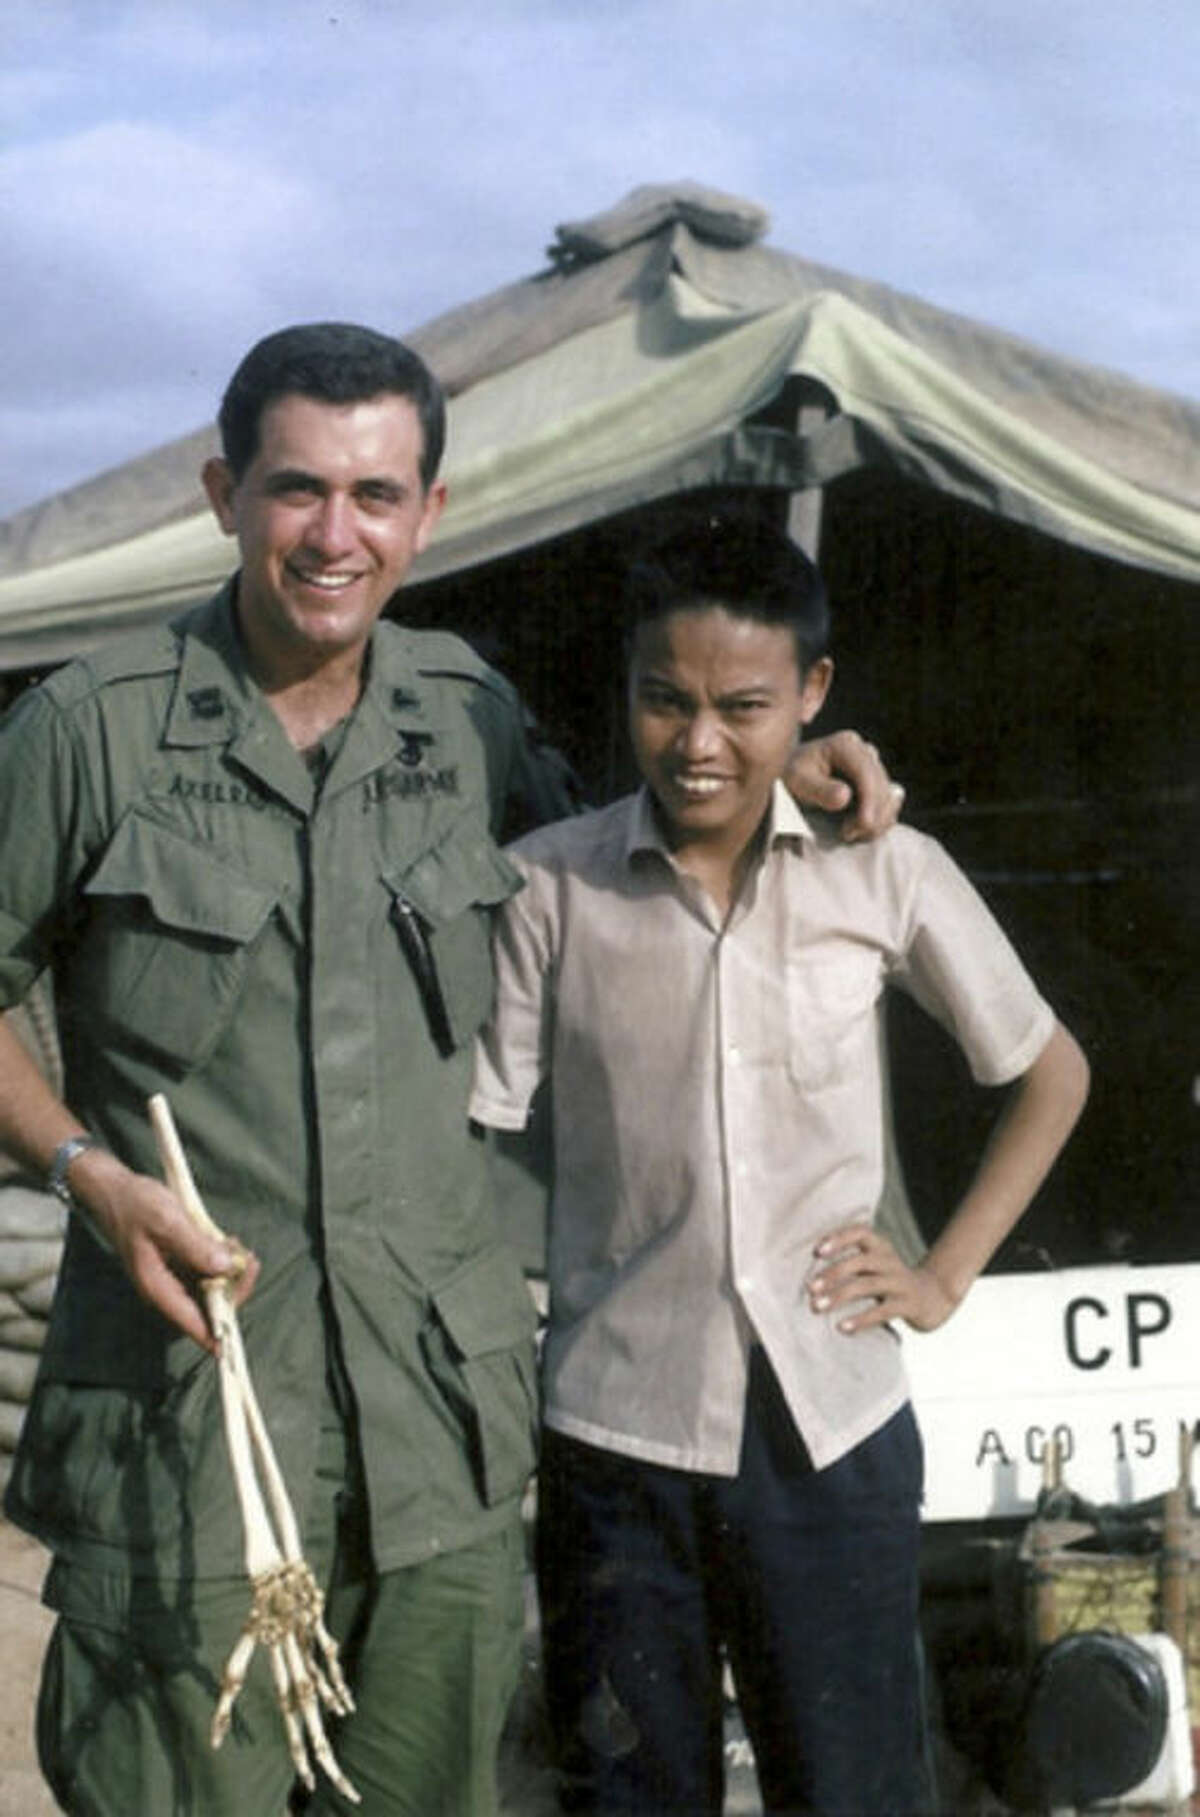 In this January 1967 photo released by Sam Axelrad, Dr. Sam Axelrad, left, displays the bones of an arm he amputated from North Vietnamese soldier Nguyen Quang Hung, right, in October 1966 in front of his military clinic in Phu Cat District in central coastal province of Binh Dinh in the former South Vietnam after Hung was shot by American troops near Hung's hometown of An Khe. On Monday, July 1, 2013 the Houston urologist met Hung at his home to return to bones. The two veterans were reunited after a Vietnamese journalist wrote an article last year about Axelrad's search for Hung, prompting Hung's brother to contact the newspaper. (AP Photo /Courtesy of Sam Axelrad)